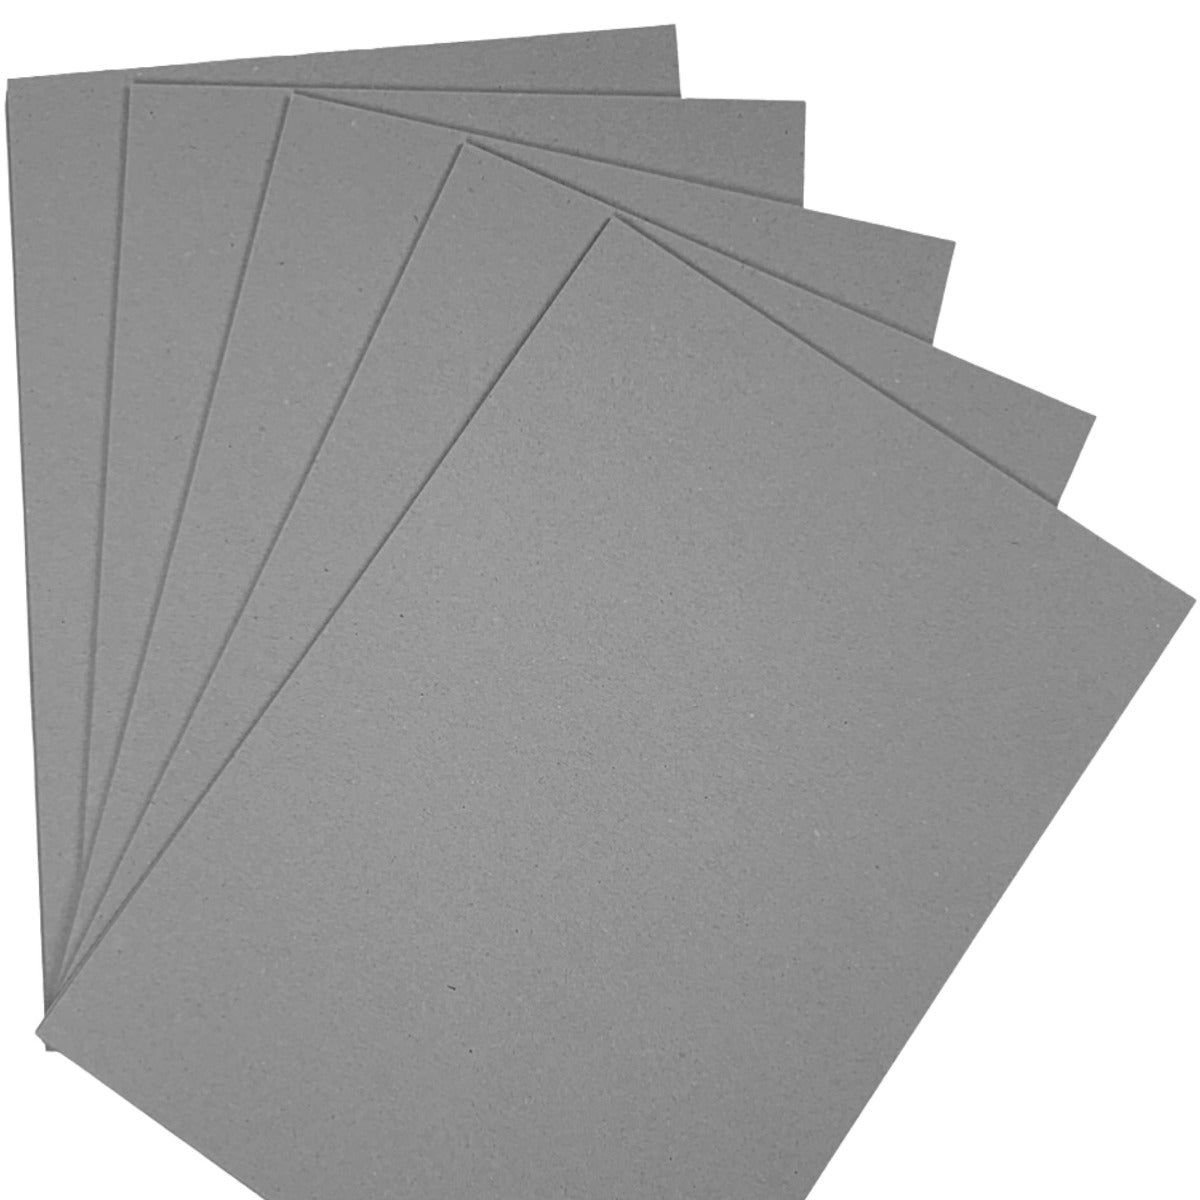 A4 Greyboard 500 Sheets 1000 Micron Recycled Card Strong Modelling & Backing Card